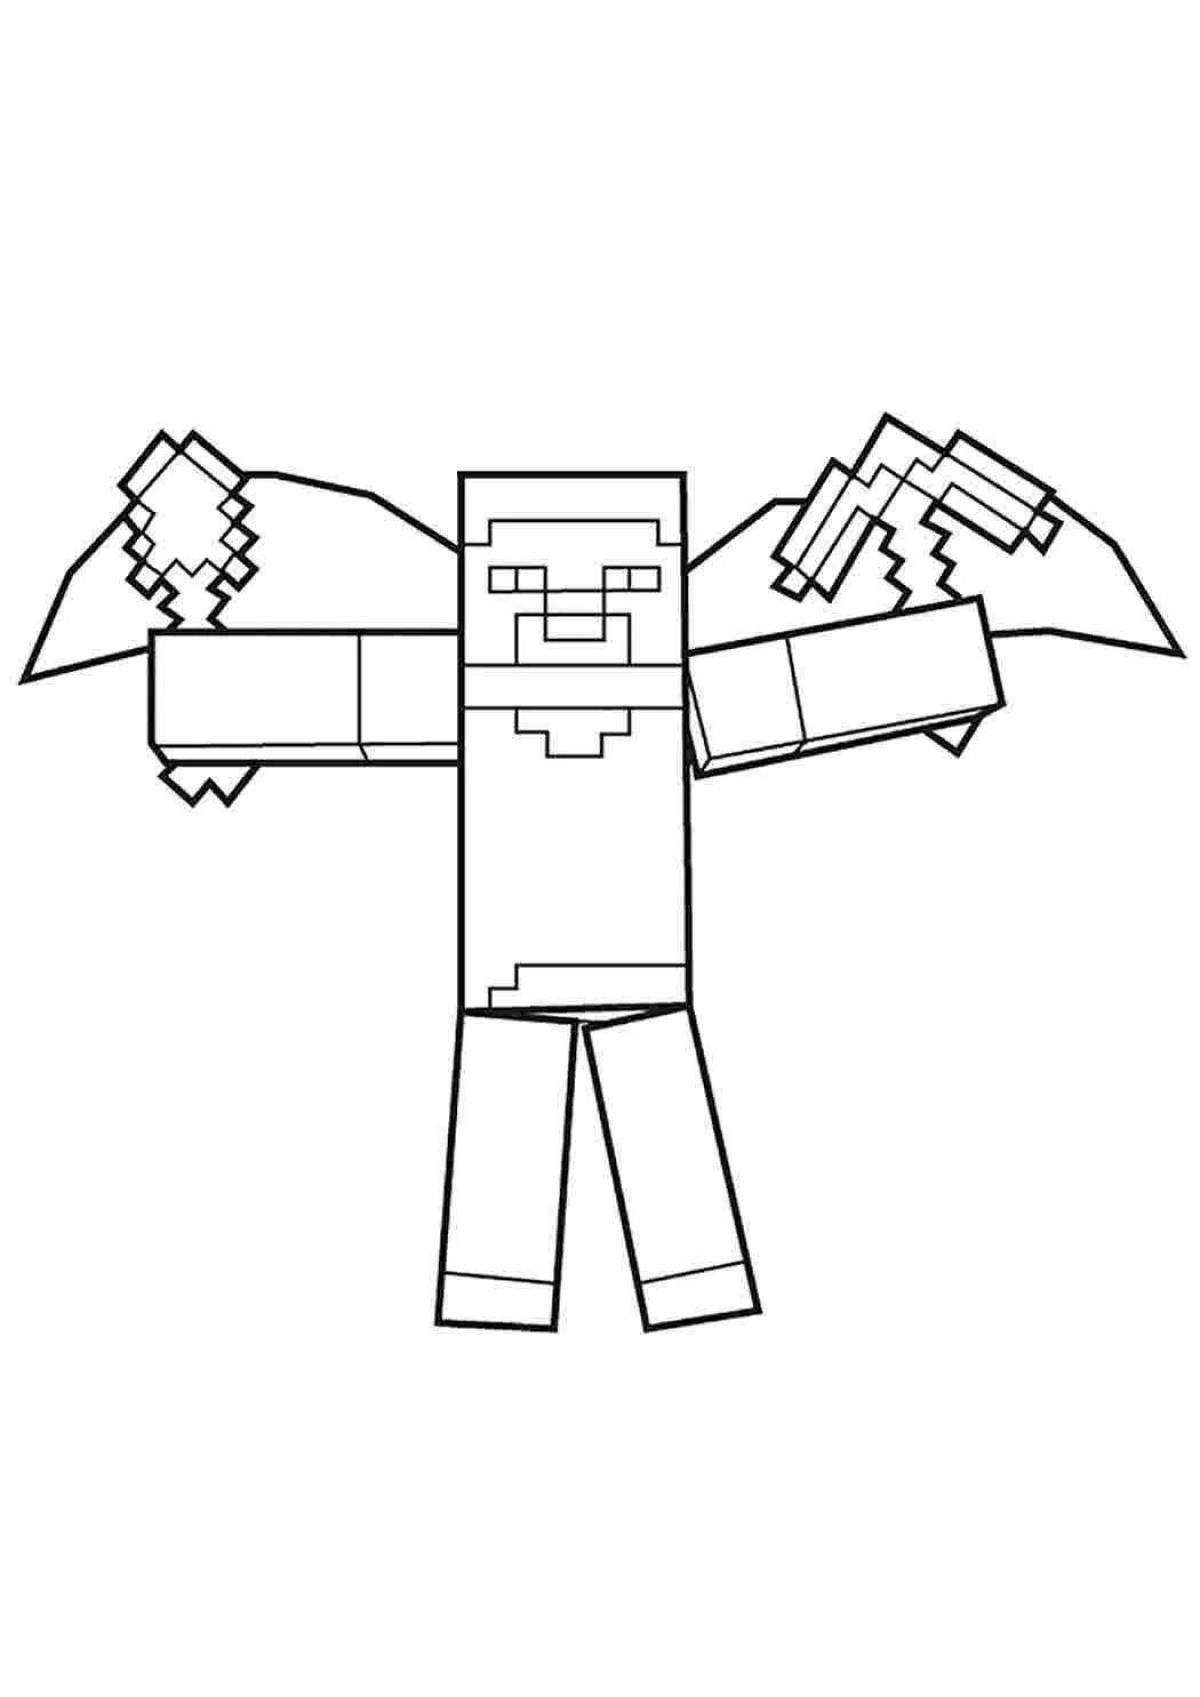 Creative minecraft robot coloring page